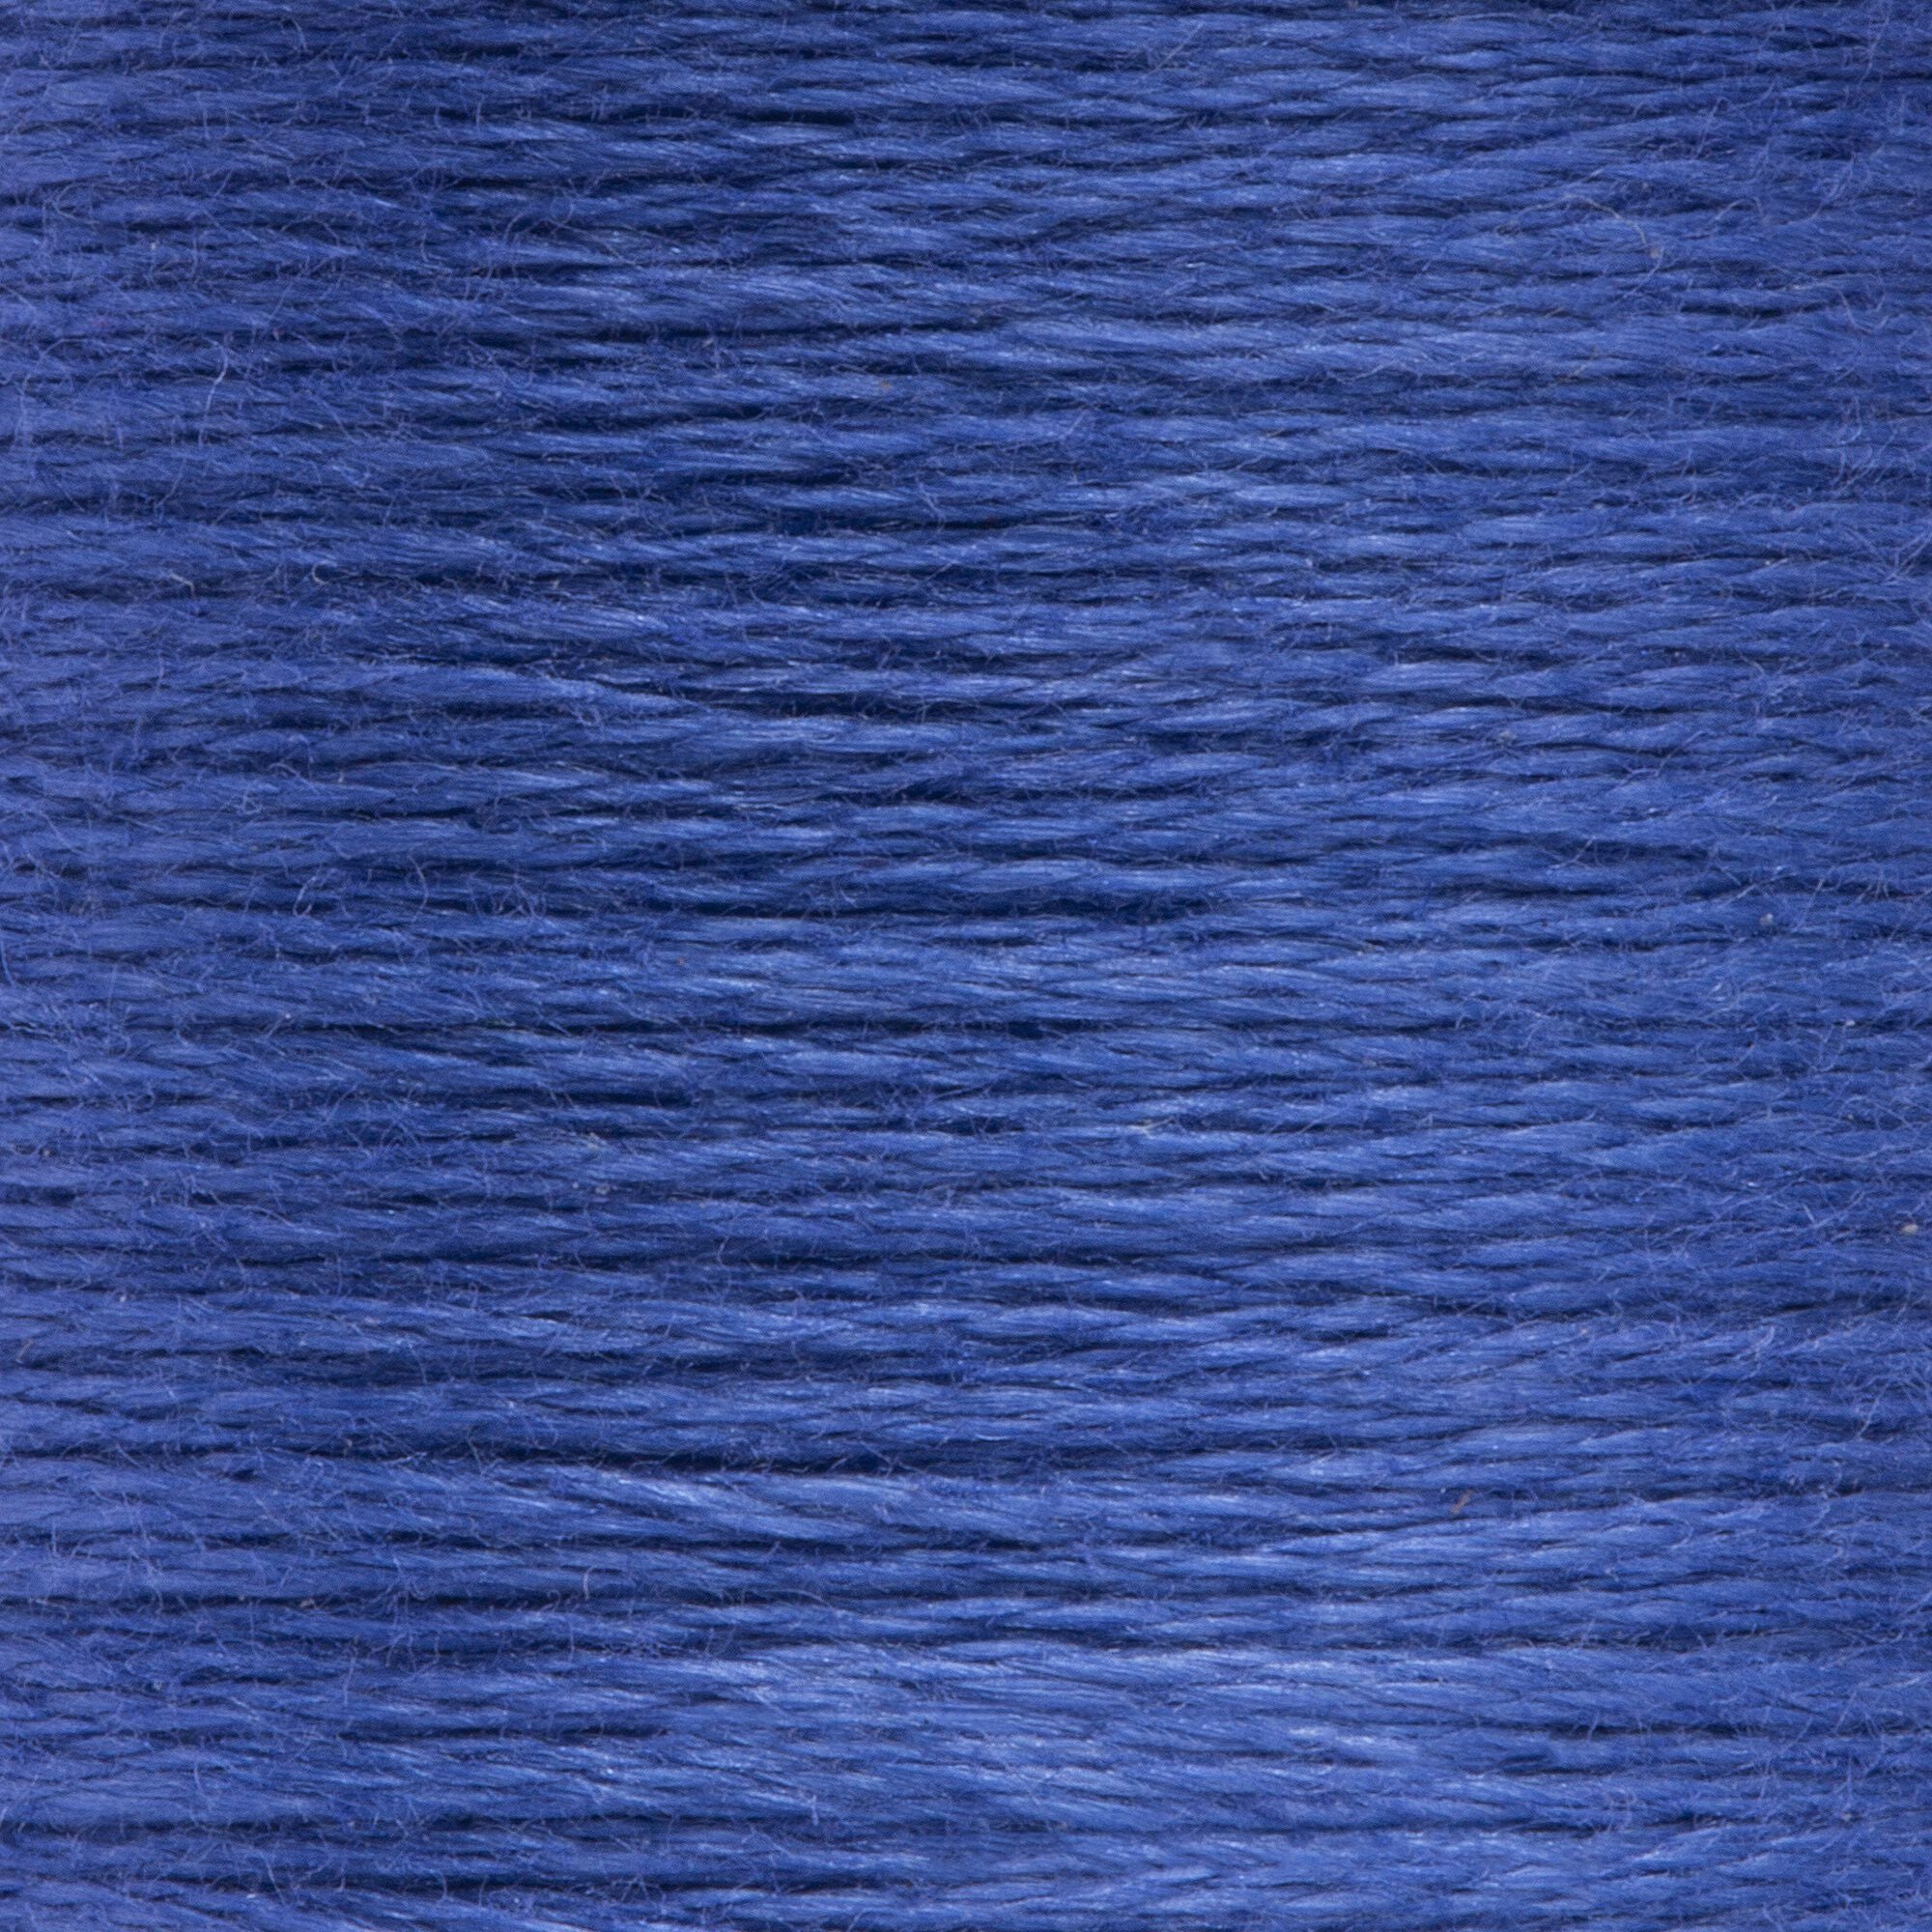 Anchor Embroidery Floss in Ocean Blue Med